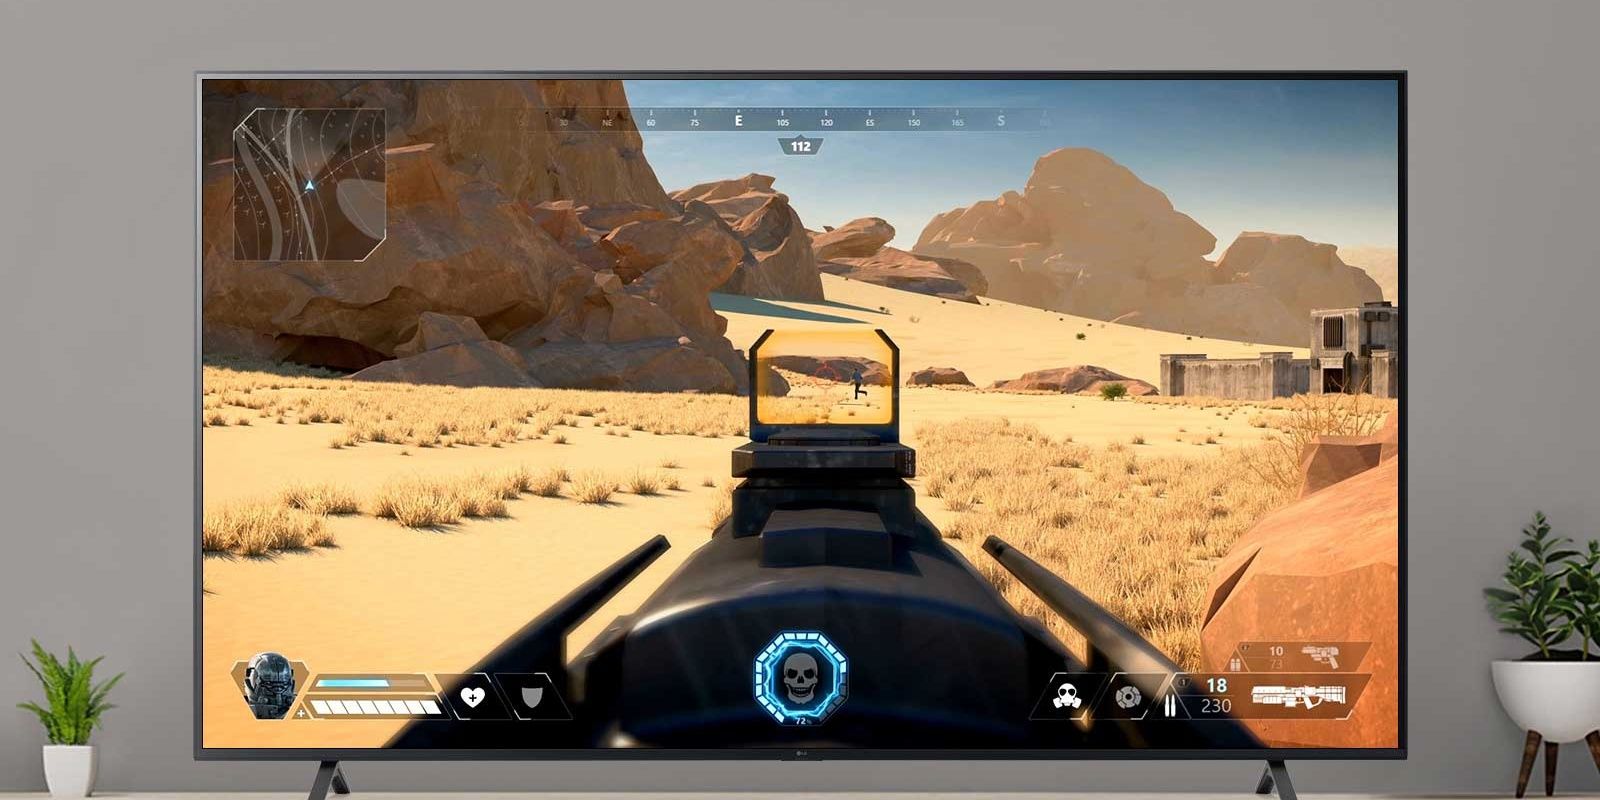 First-person shooter on LG UP7000 Series UHD Smart TV